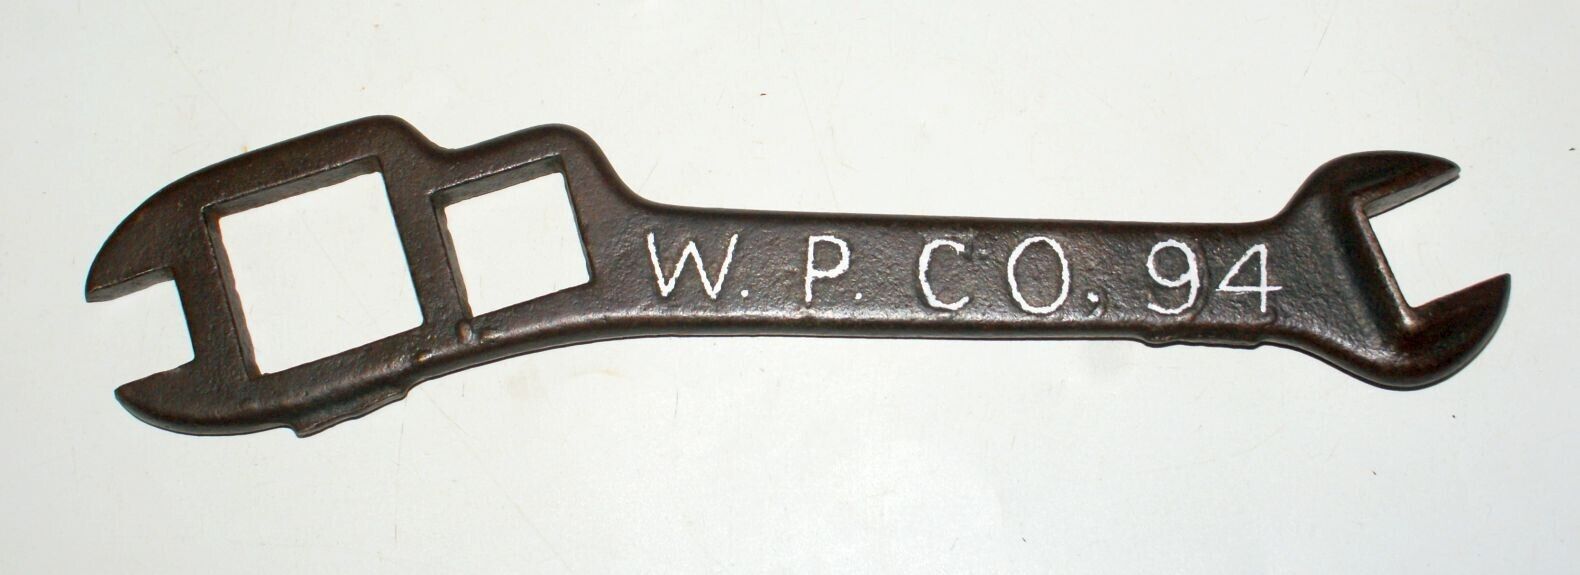 Old Antique Vintage Wiard Plow W. P. Co. 94 Batavia NY wrench tool